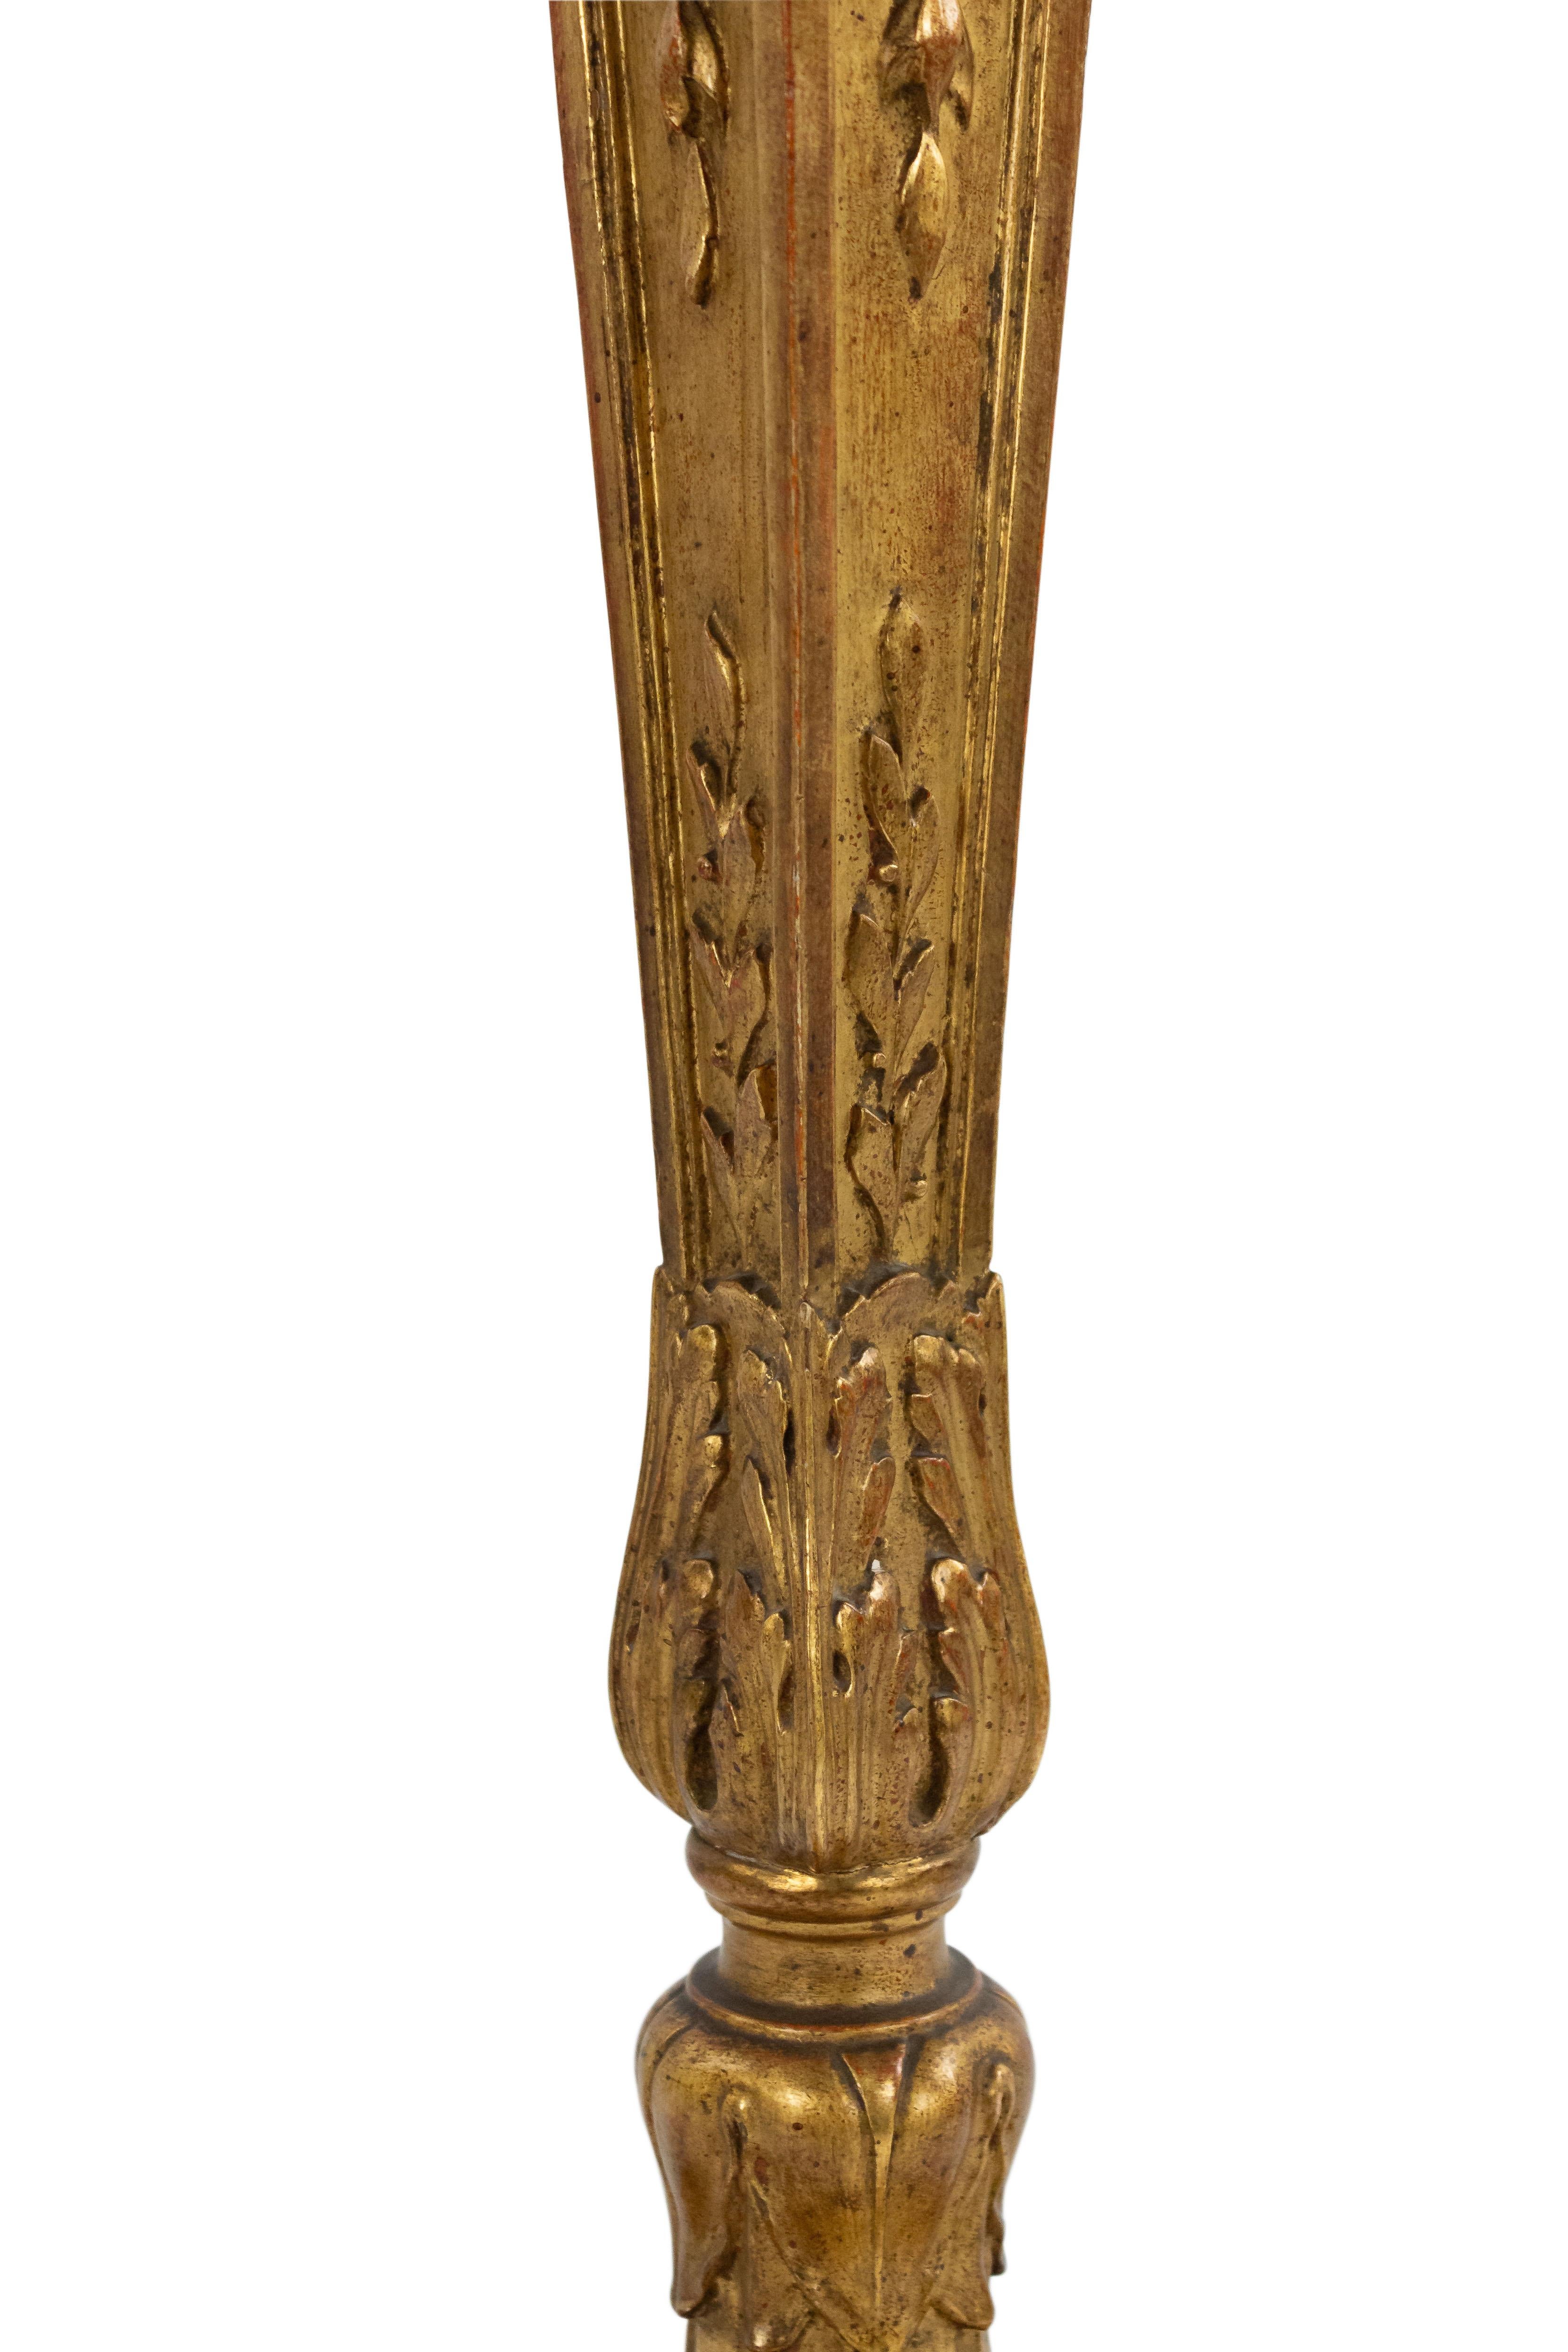 Neoclassical Italian Neoclassic Carved Giltwood Table Lamp